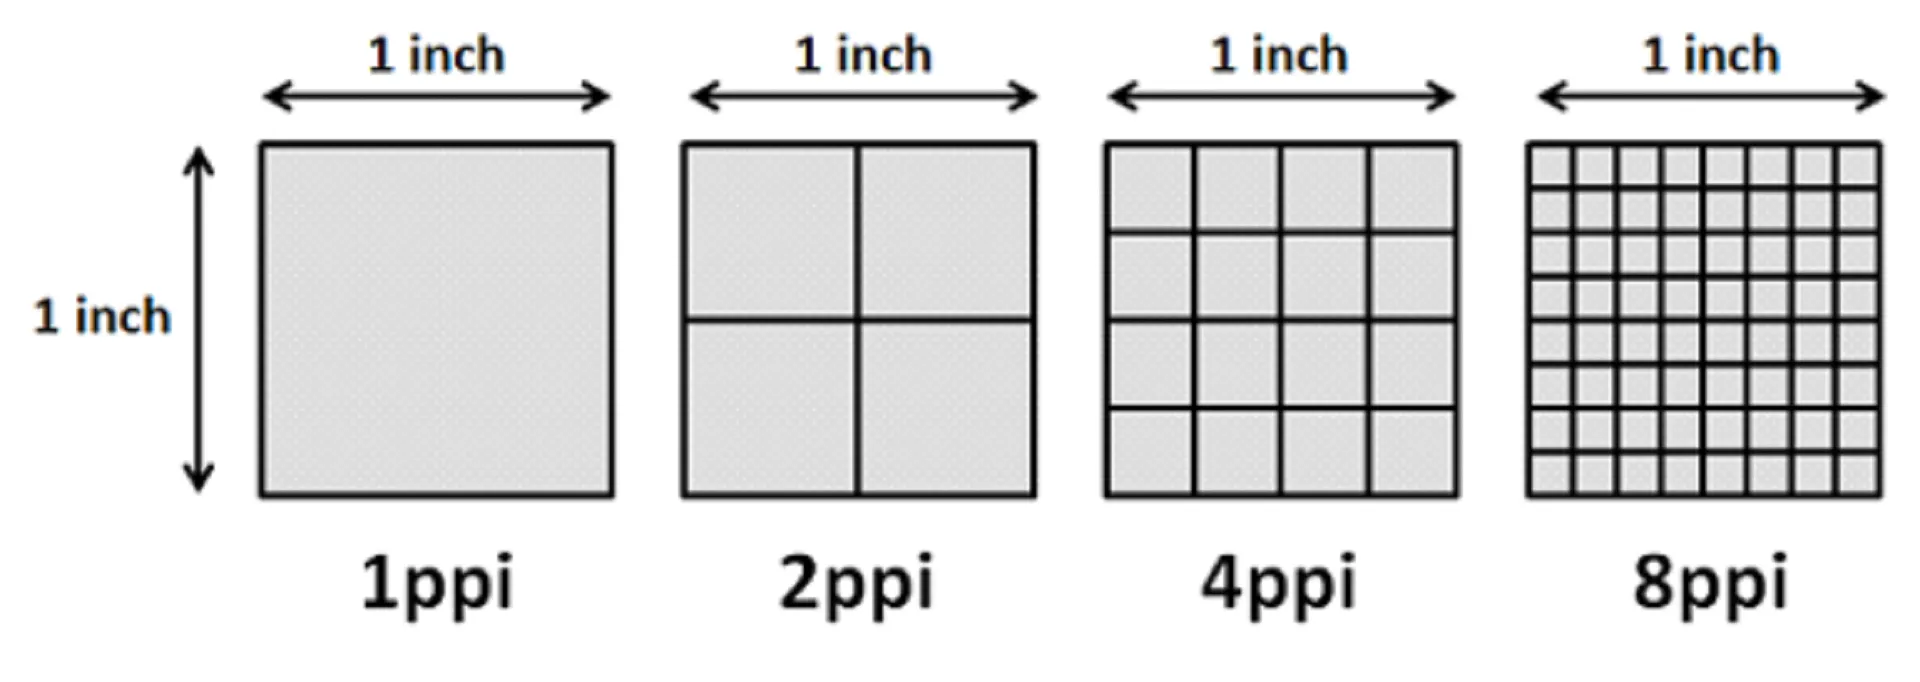 Pixels Per Inch (PPI): The Quality Indicator for Your Screen